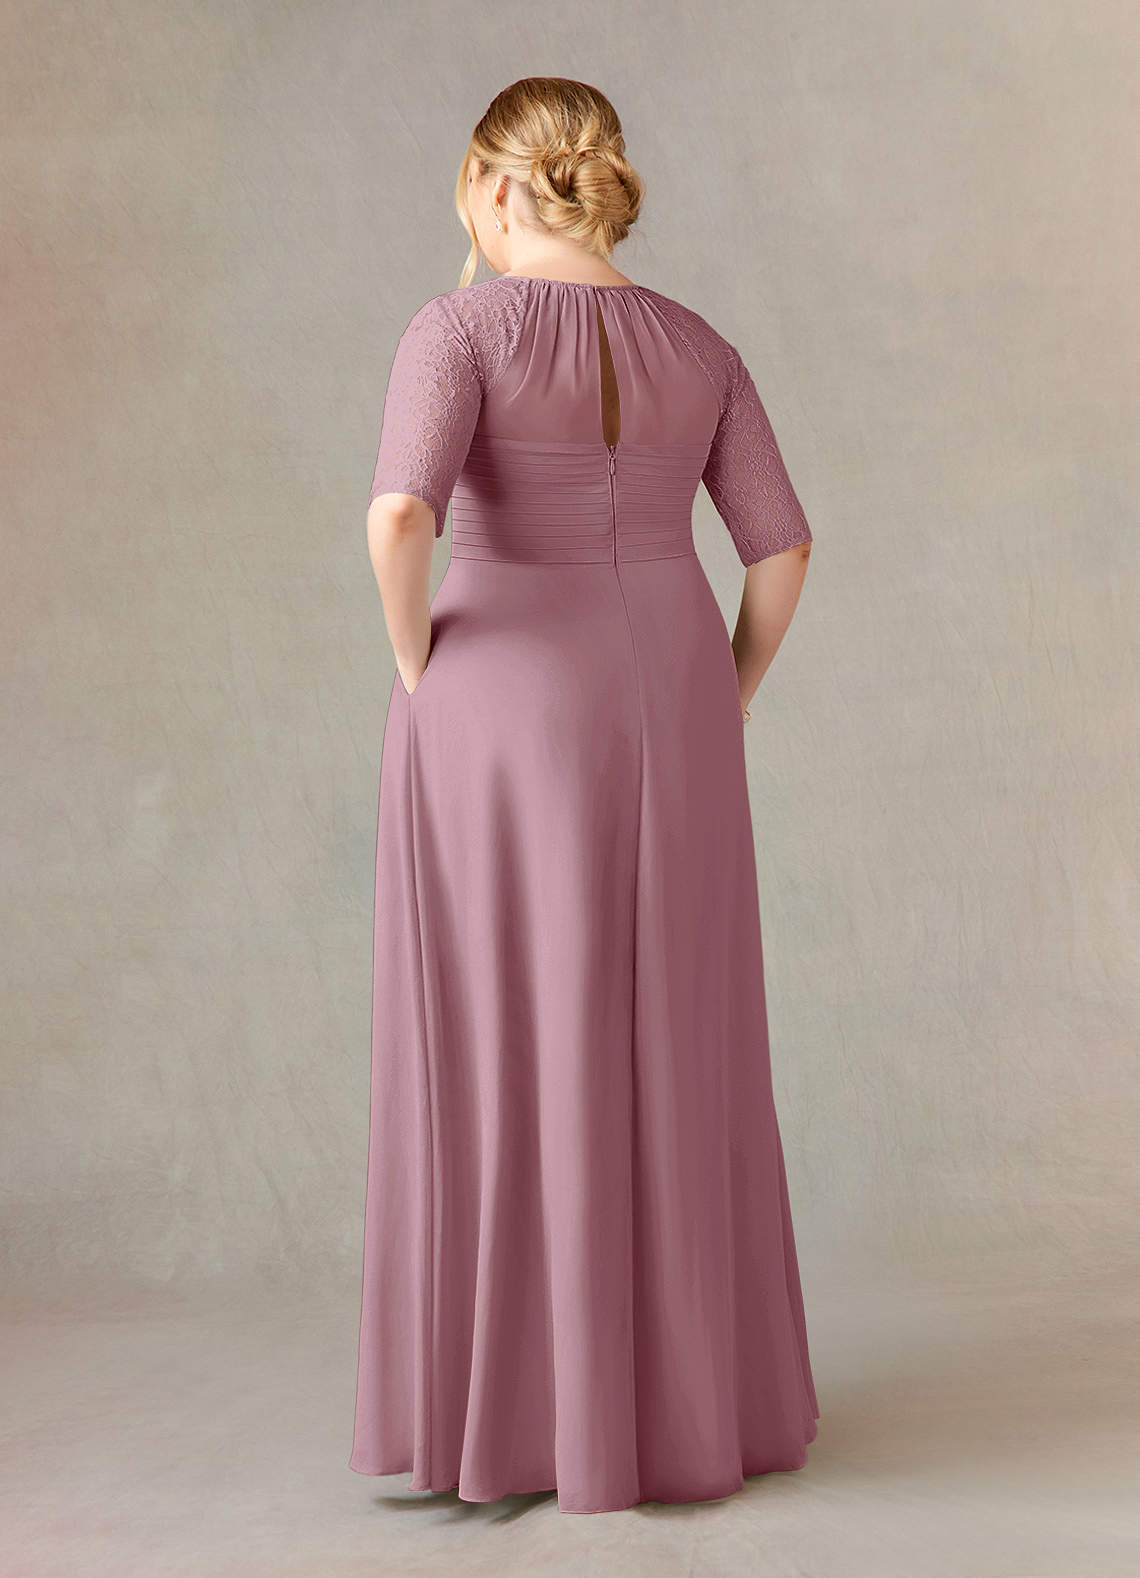 Azazie Barrymore Mother of the Bride Dresses A-Line Scoop lace Chiffon Floor-Length Dress image1